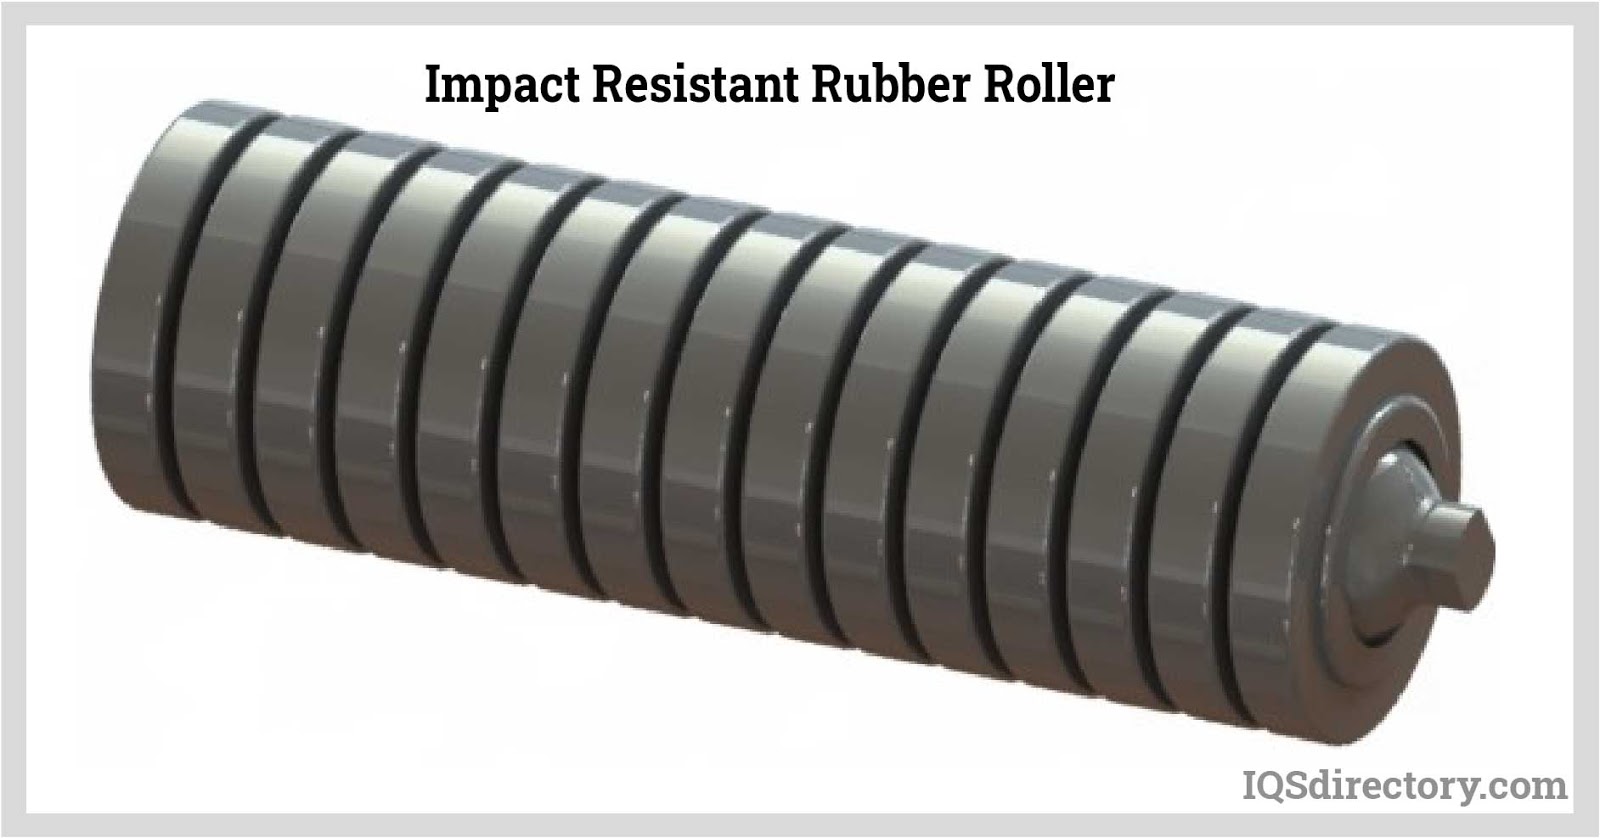 Impact Resistant Rubber Roller